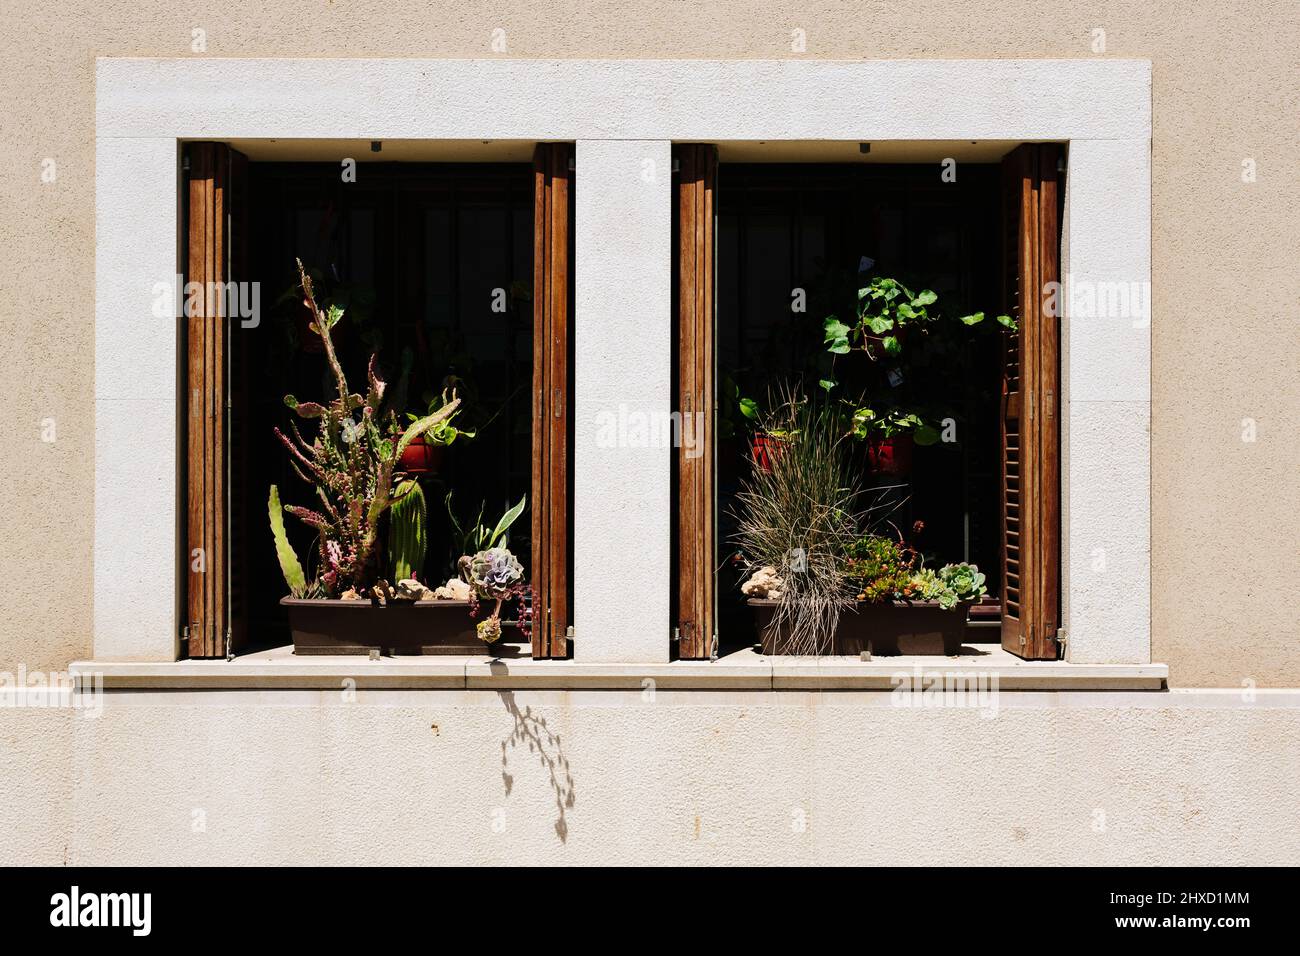 Mediterranean double window in the old town of Sa Cabaneta, Spain Stock Photo